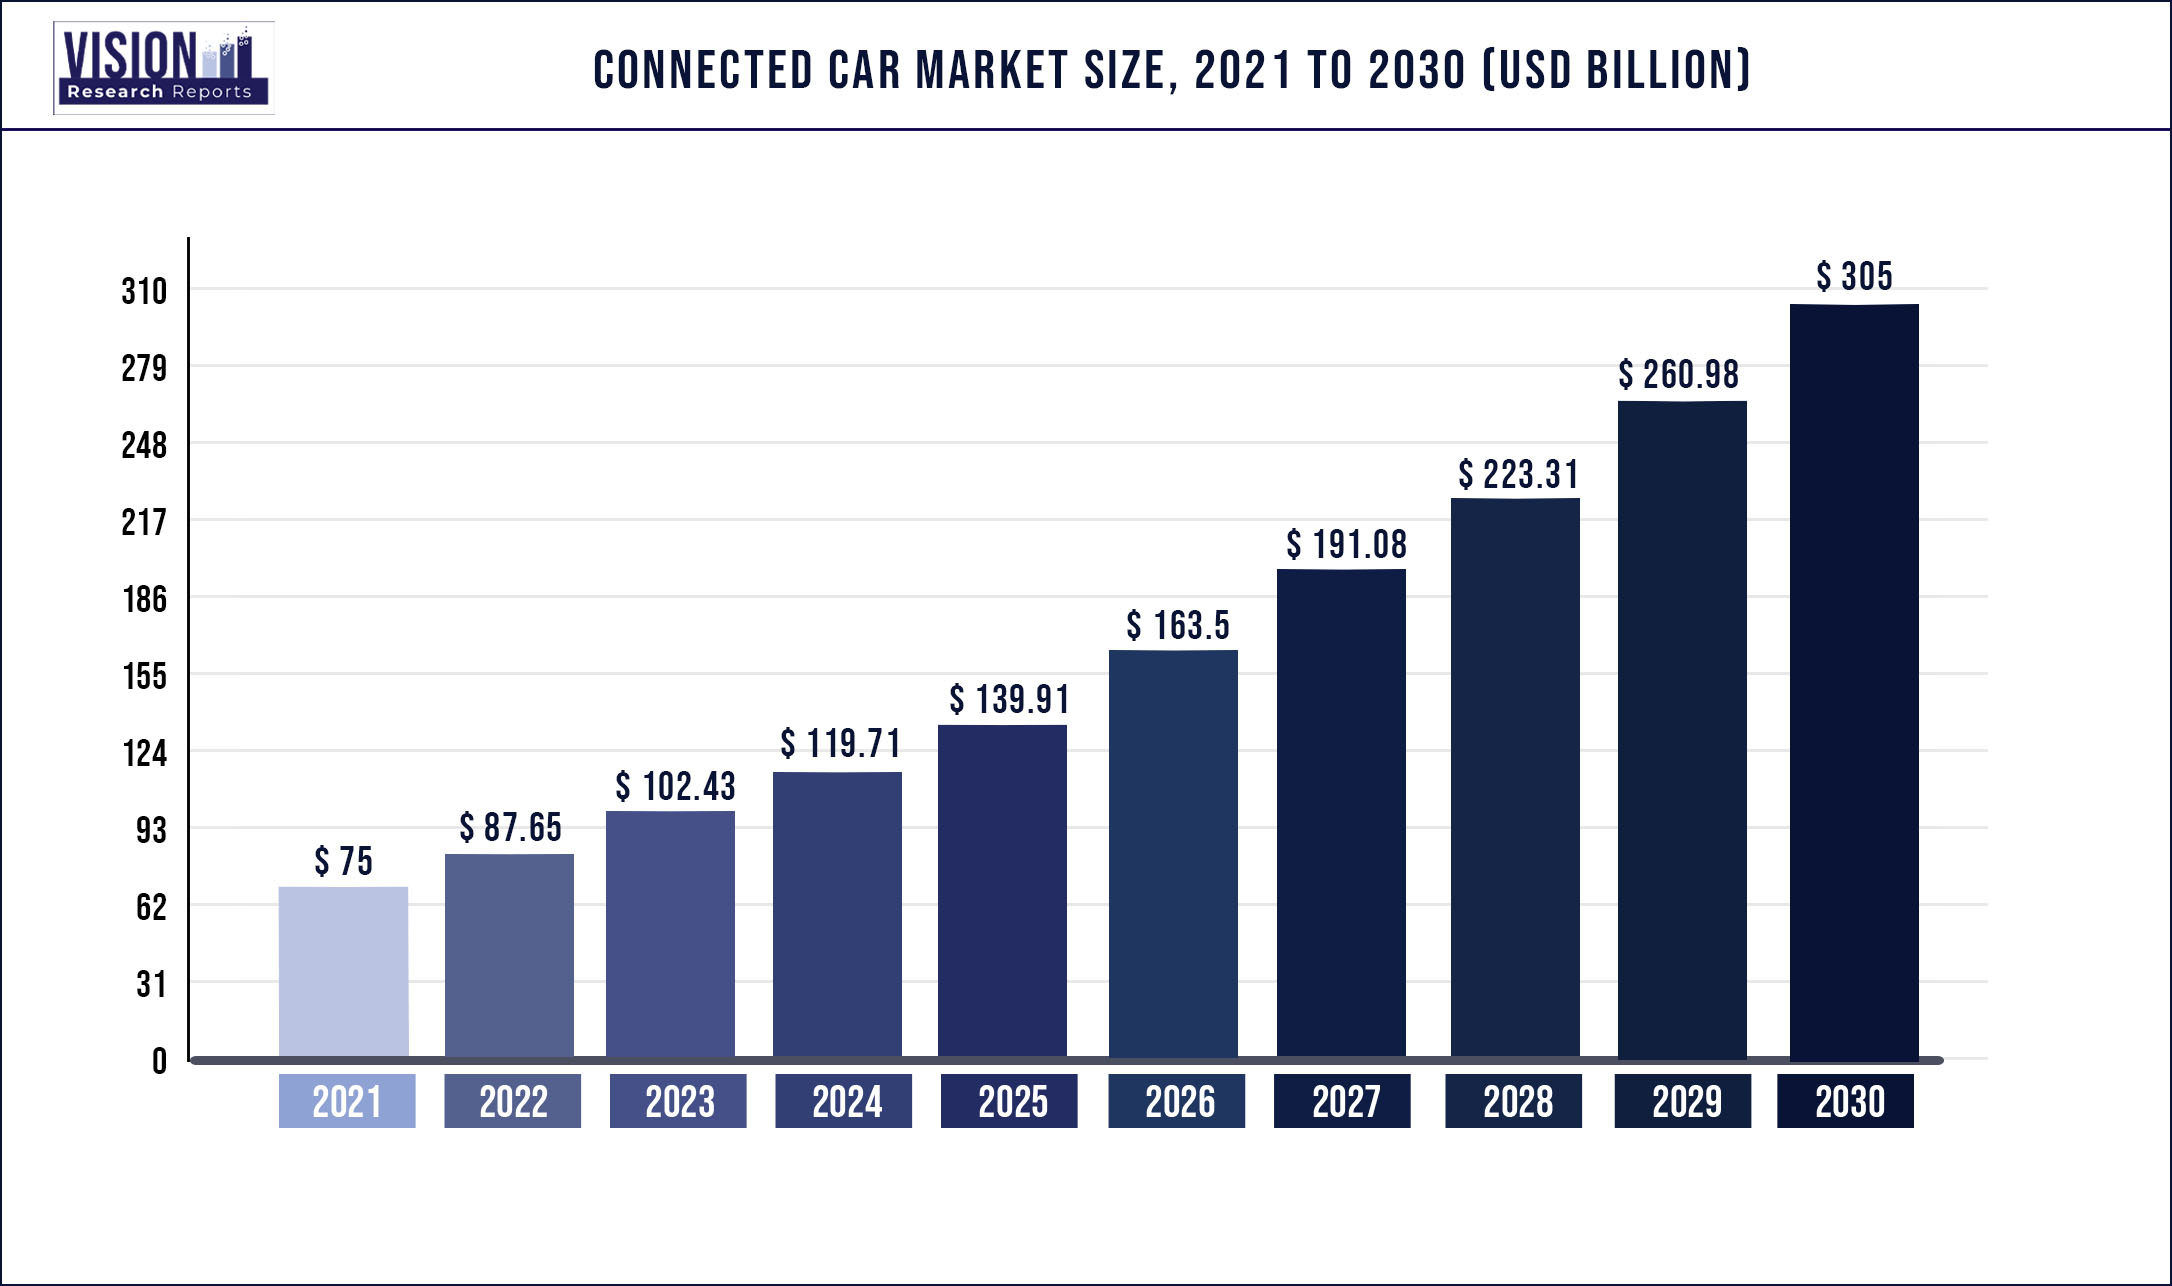 Connected Car Market Size 2021 to 2030